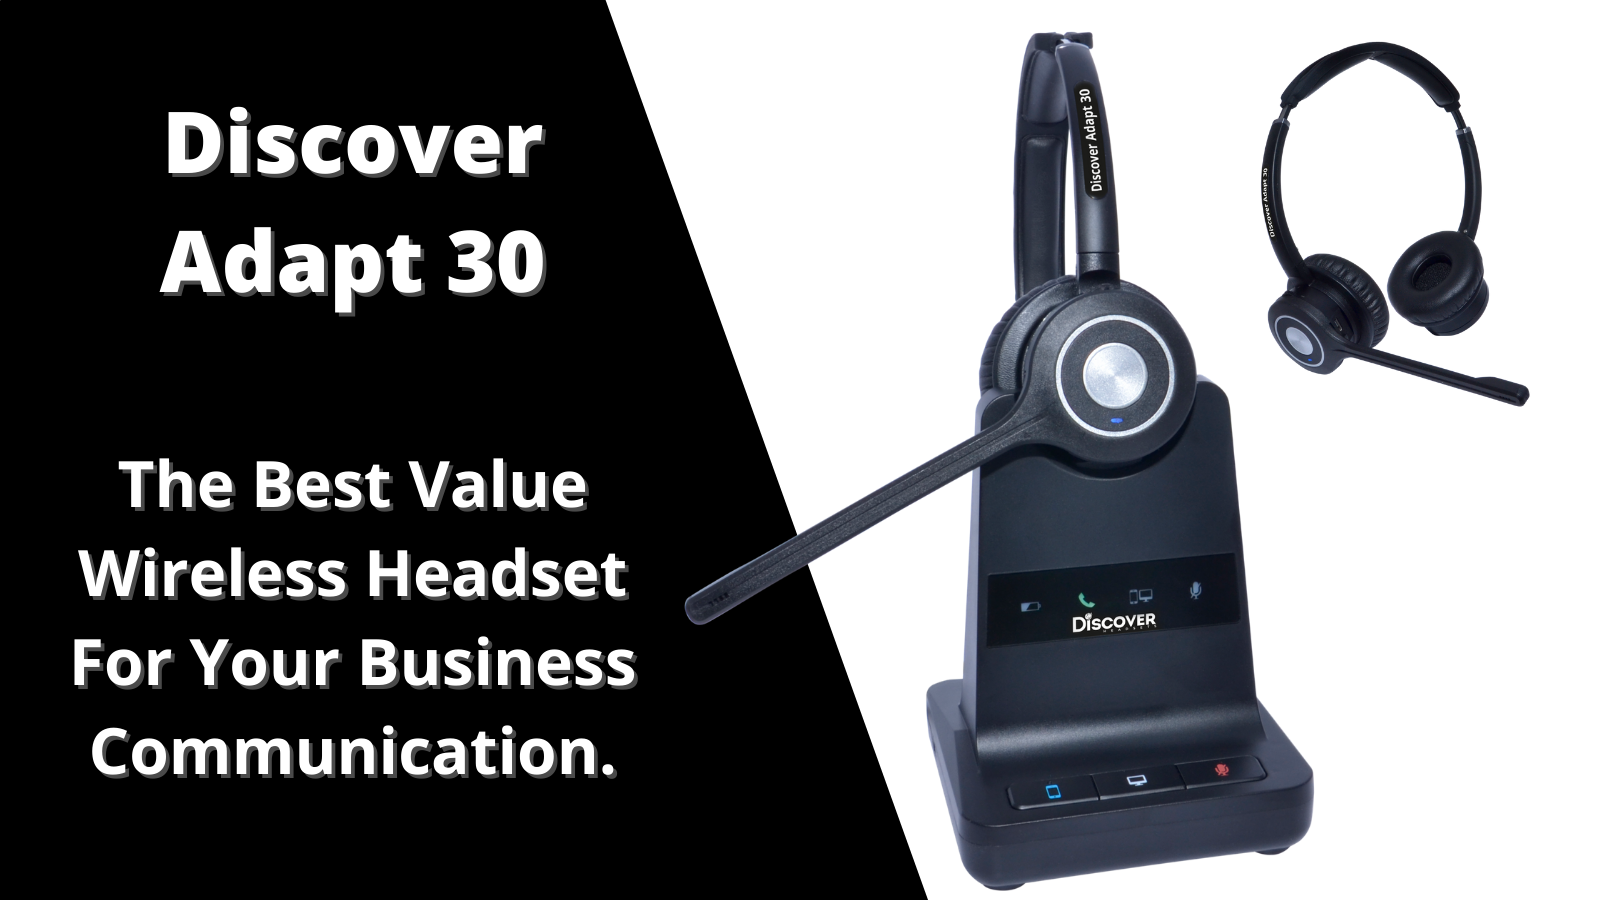 Discover Adapt 30 Wireless Headset System For Professionals- Read This Before Making A Decision - Headset Advisor